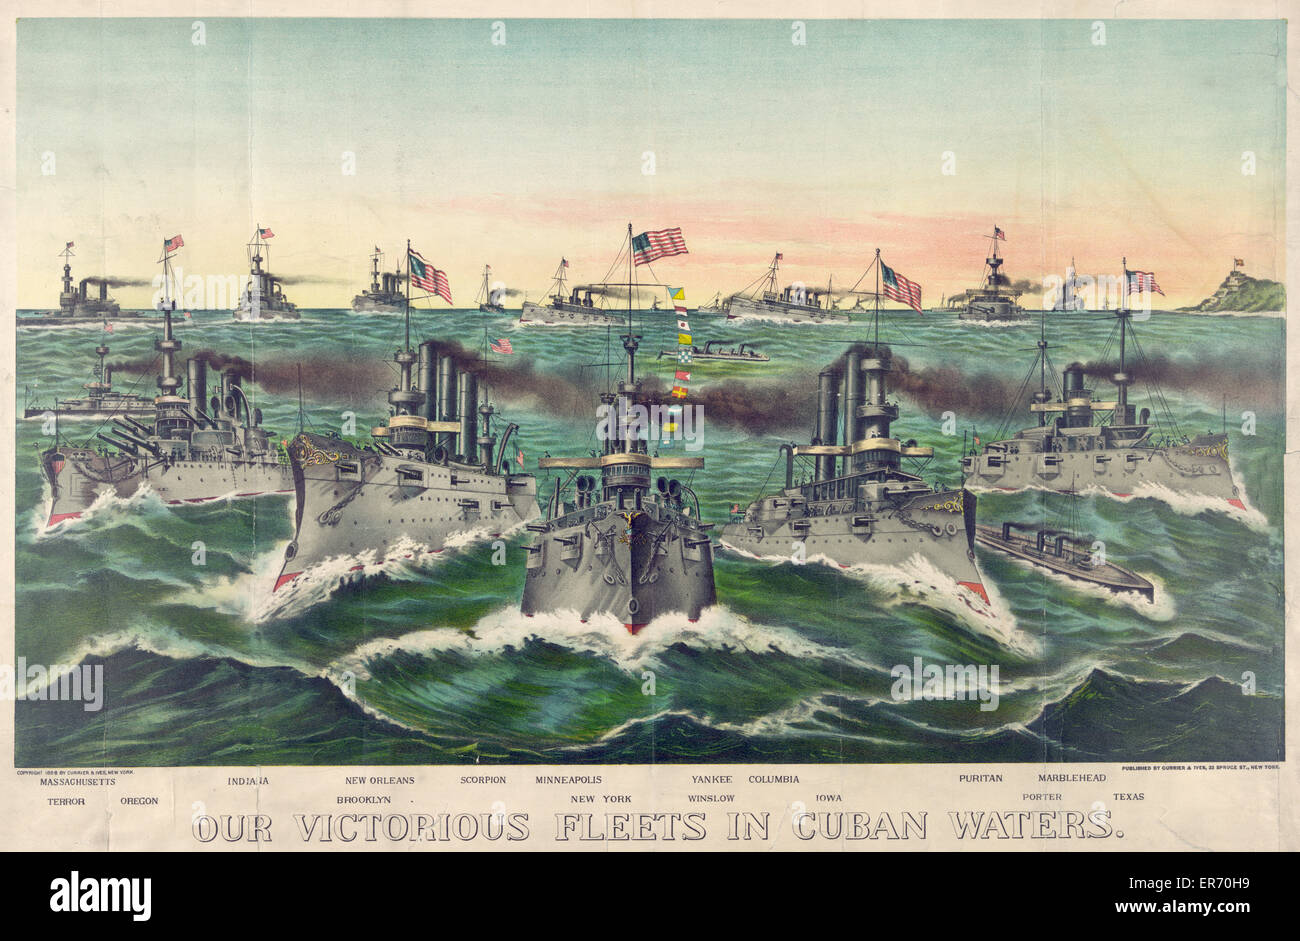 Our victorious fleets in Cuban waters. Date c1898. Stock Photo